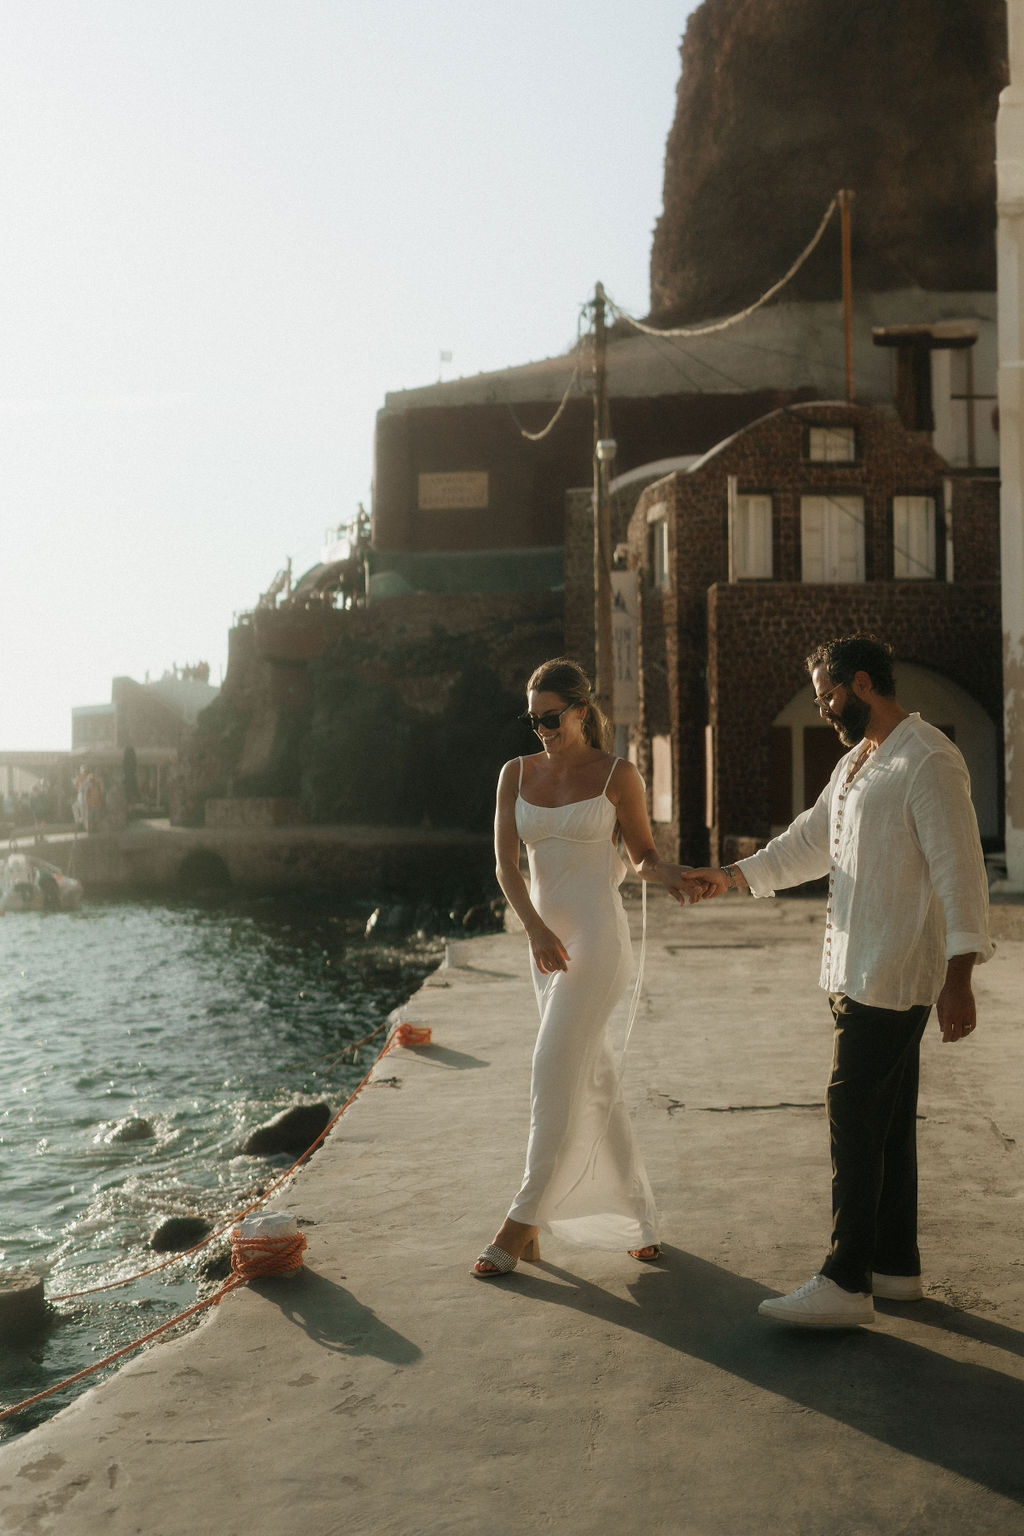 A couple walking hand in hand along a seaside promenade, with the woman wearing a white dress and the man in a white shirt 